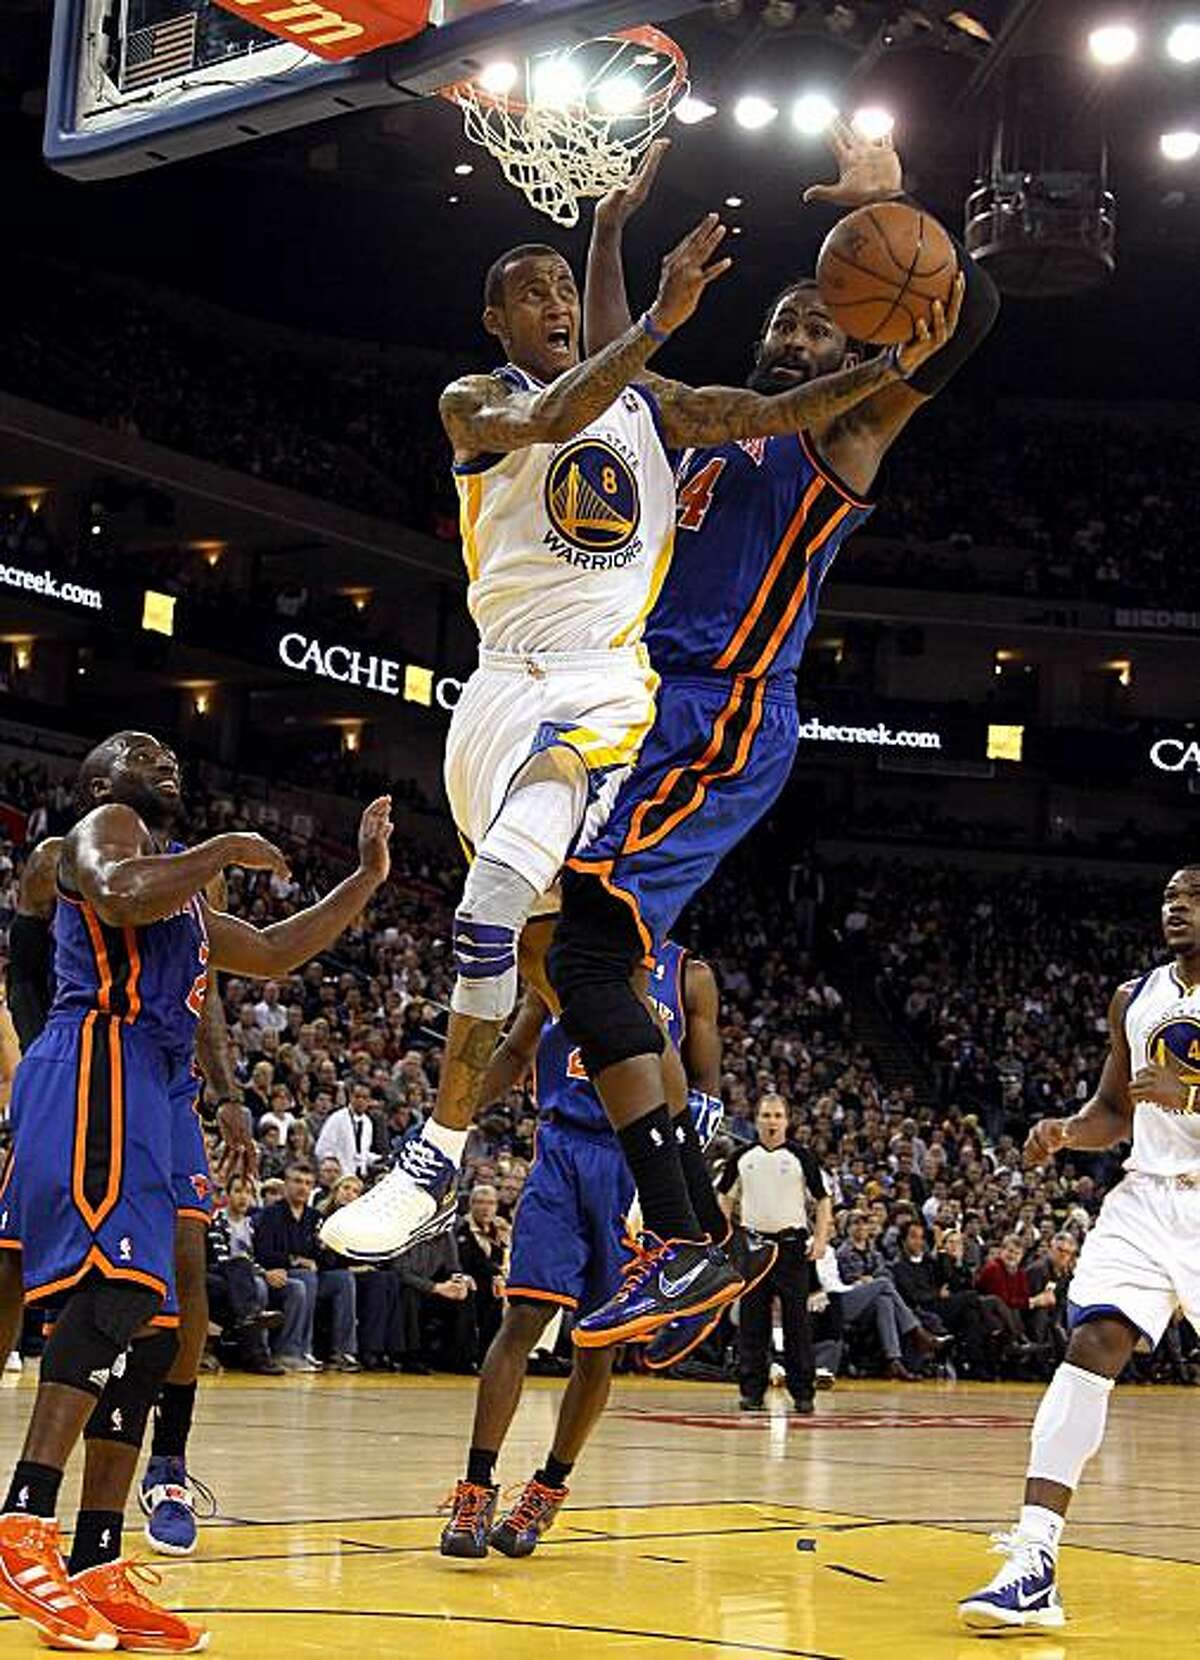 OAKLAND, CA - NOVEMBER 19: Monta Ellis #8 of the Golden State Warriors goes up for a shot while defended by Ronny Turiaf #14 of the New York Knicks at Oracle Arena on November 19, 2010 in Oakland, California. NOTE TO USER: User expressly acknowledges andagrees that, by downloading and or using this photograph, User is consenting to the terms and conditions of the Getty Images License Agreement.